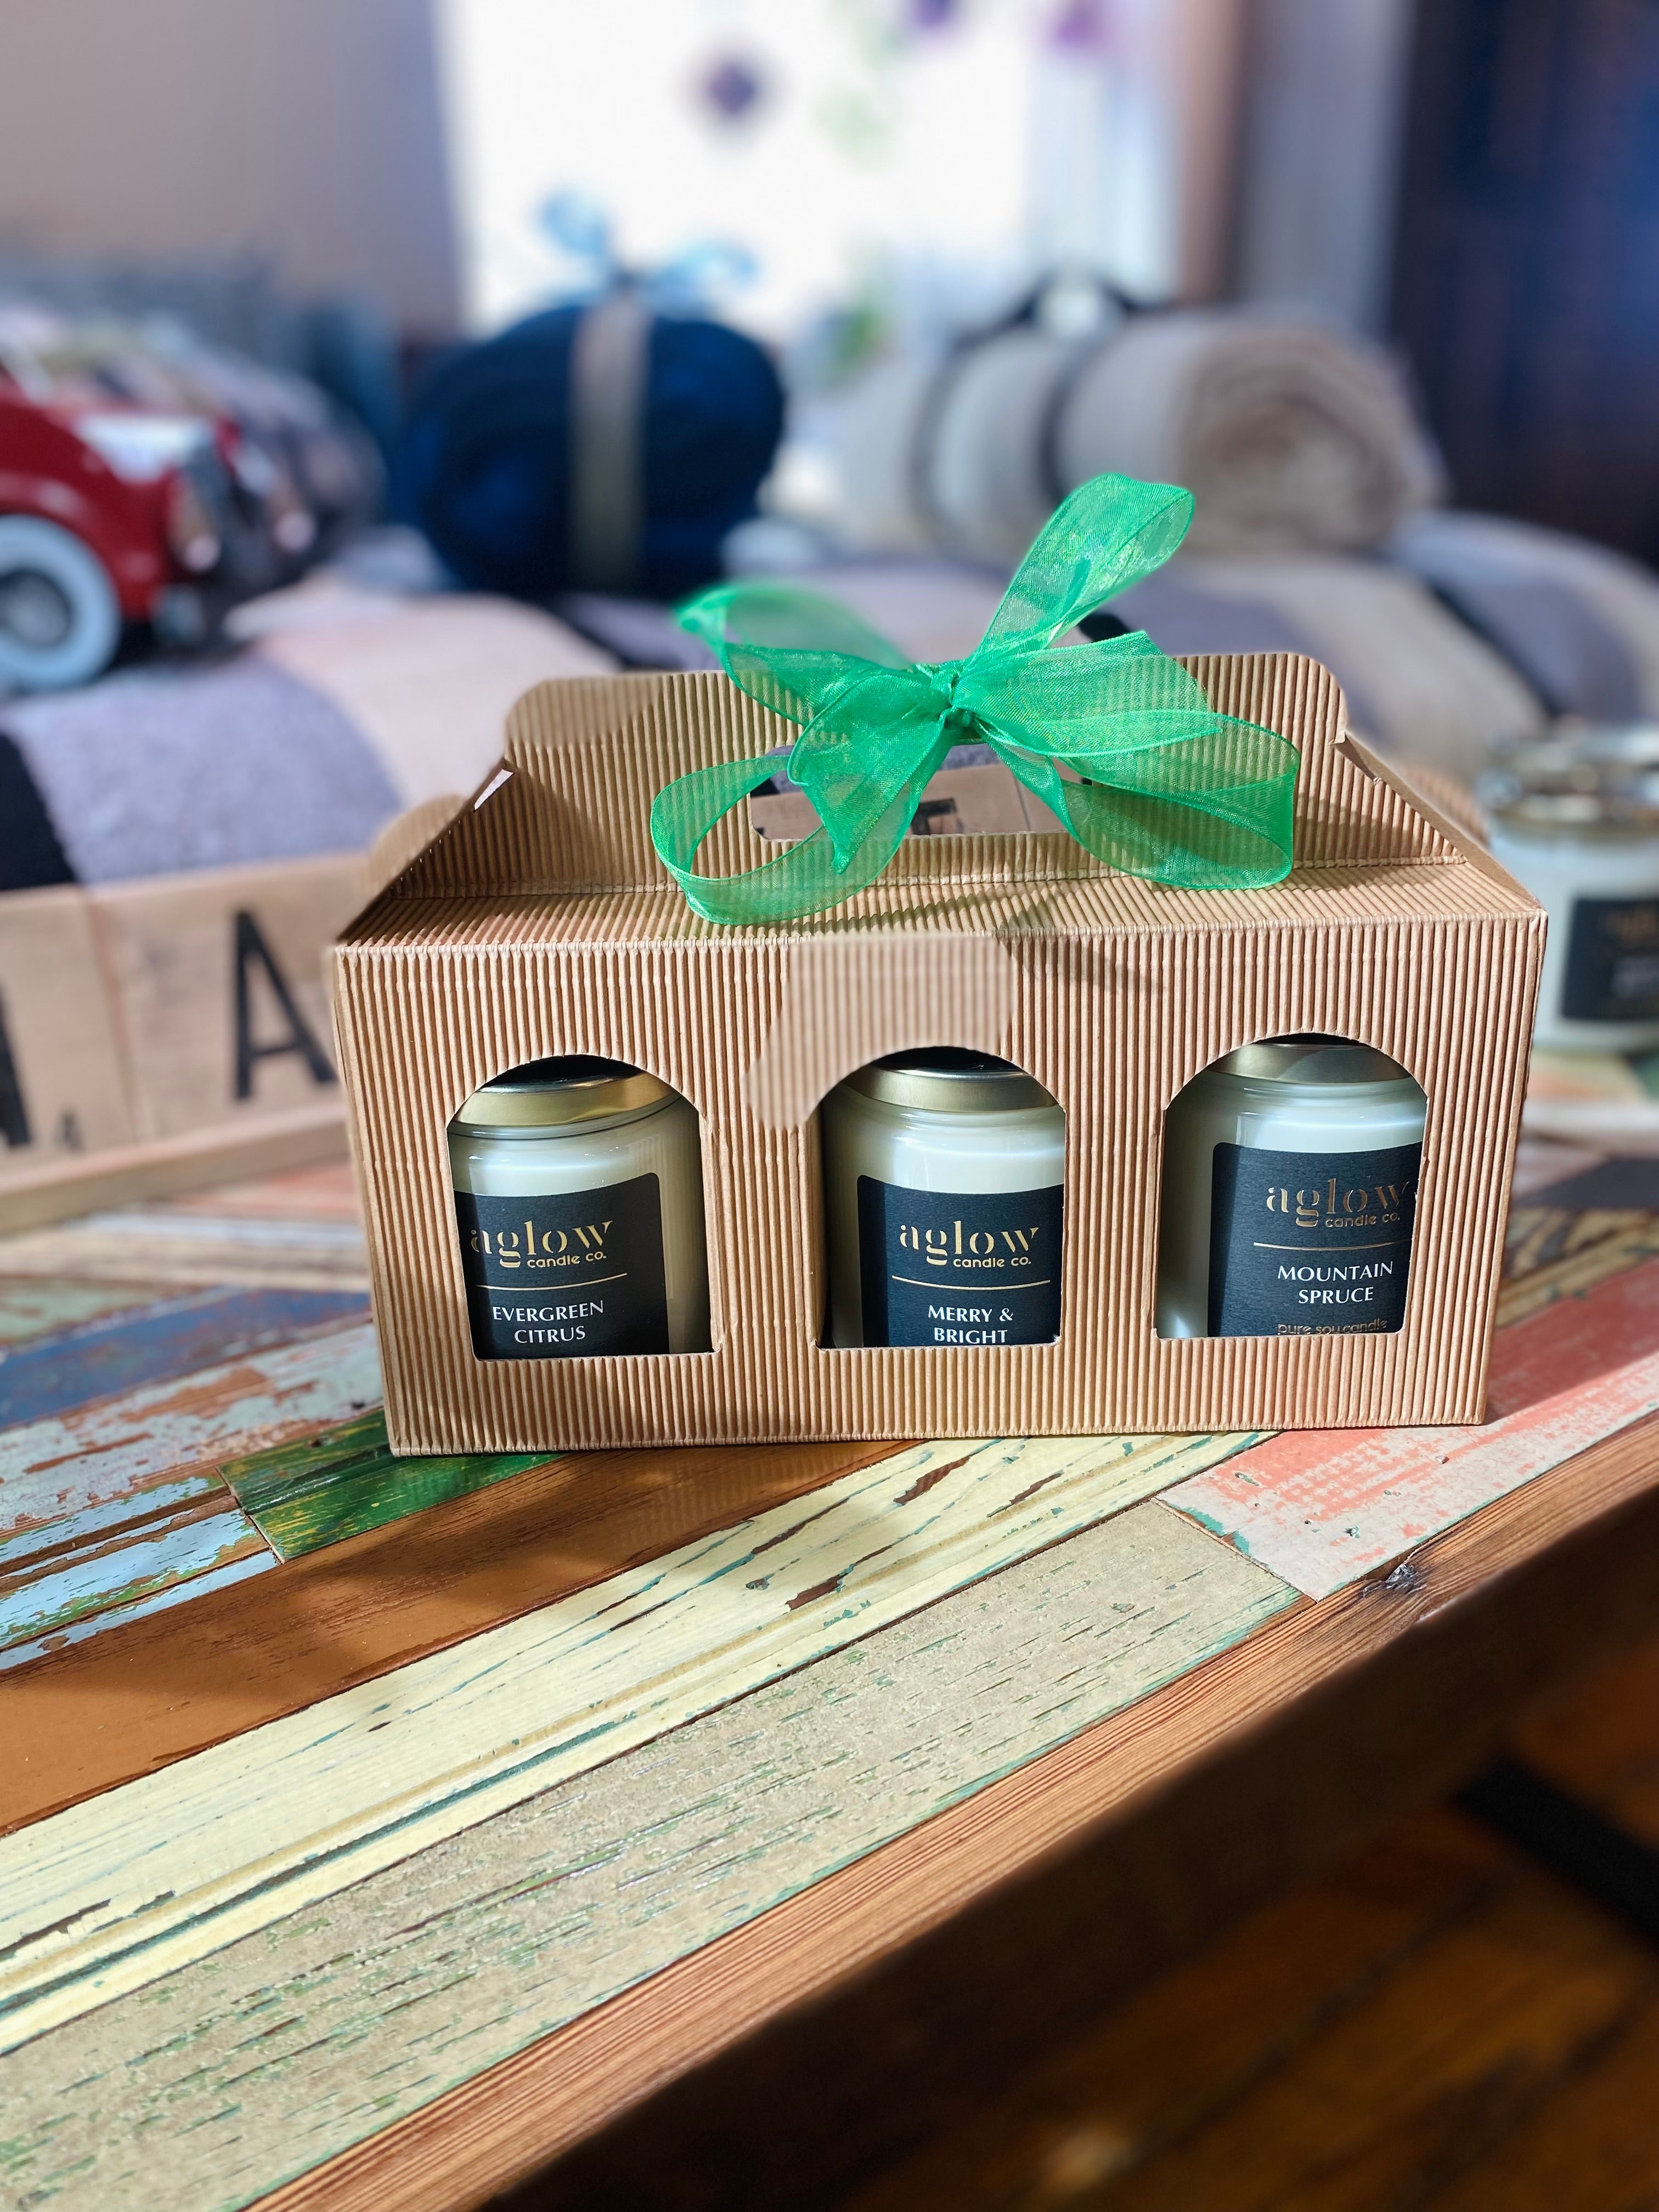 Holiday Gift Pack - Evergreen Citrus. Merry & Bright. Mountain Spruce.